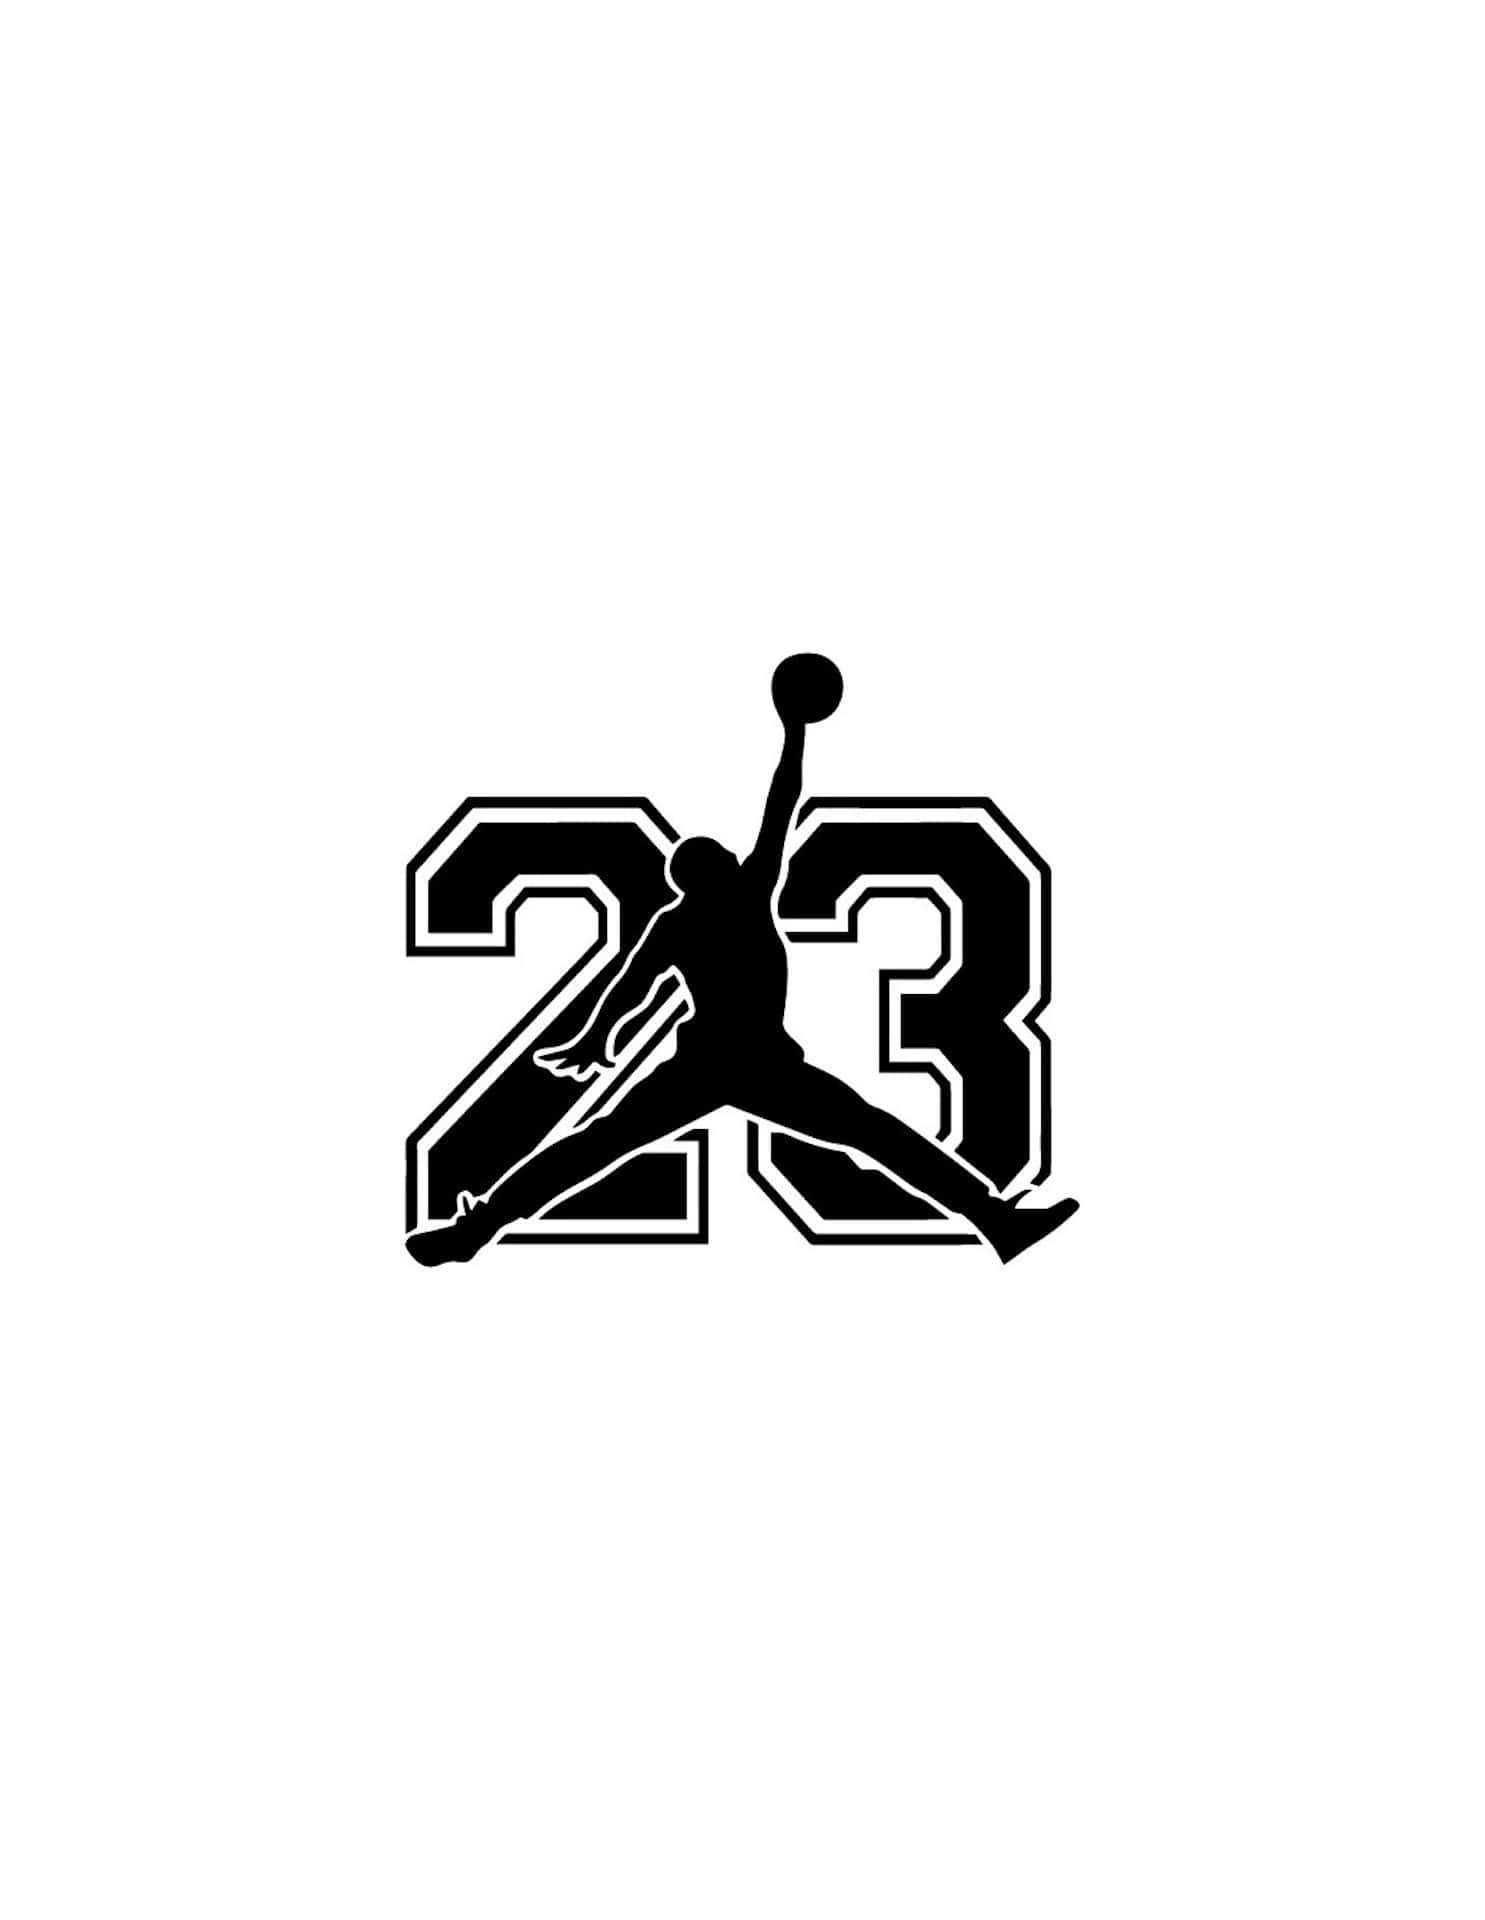 Jumpman Logowith Number23 Wallpaper